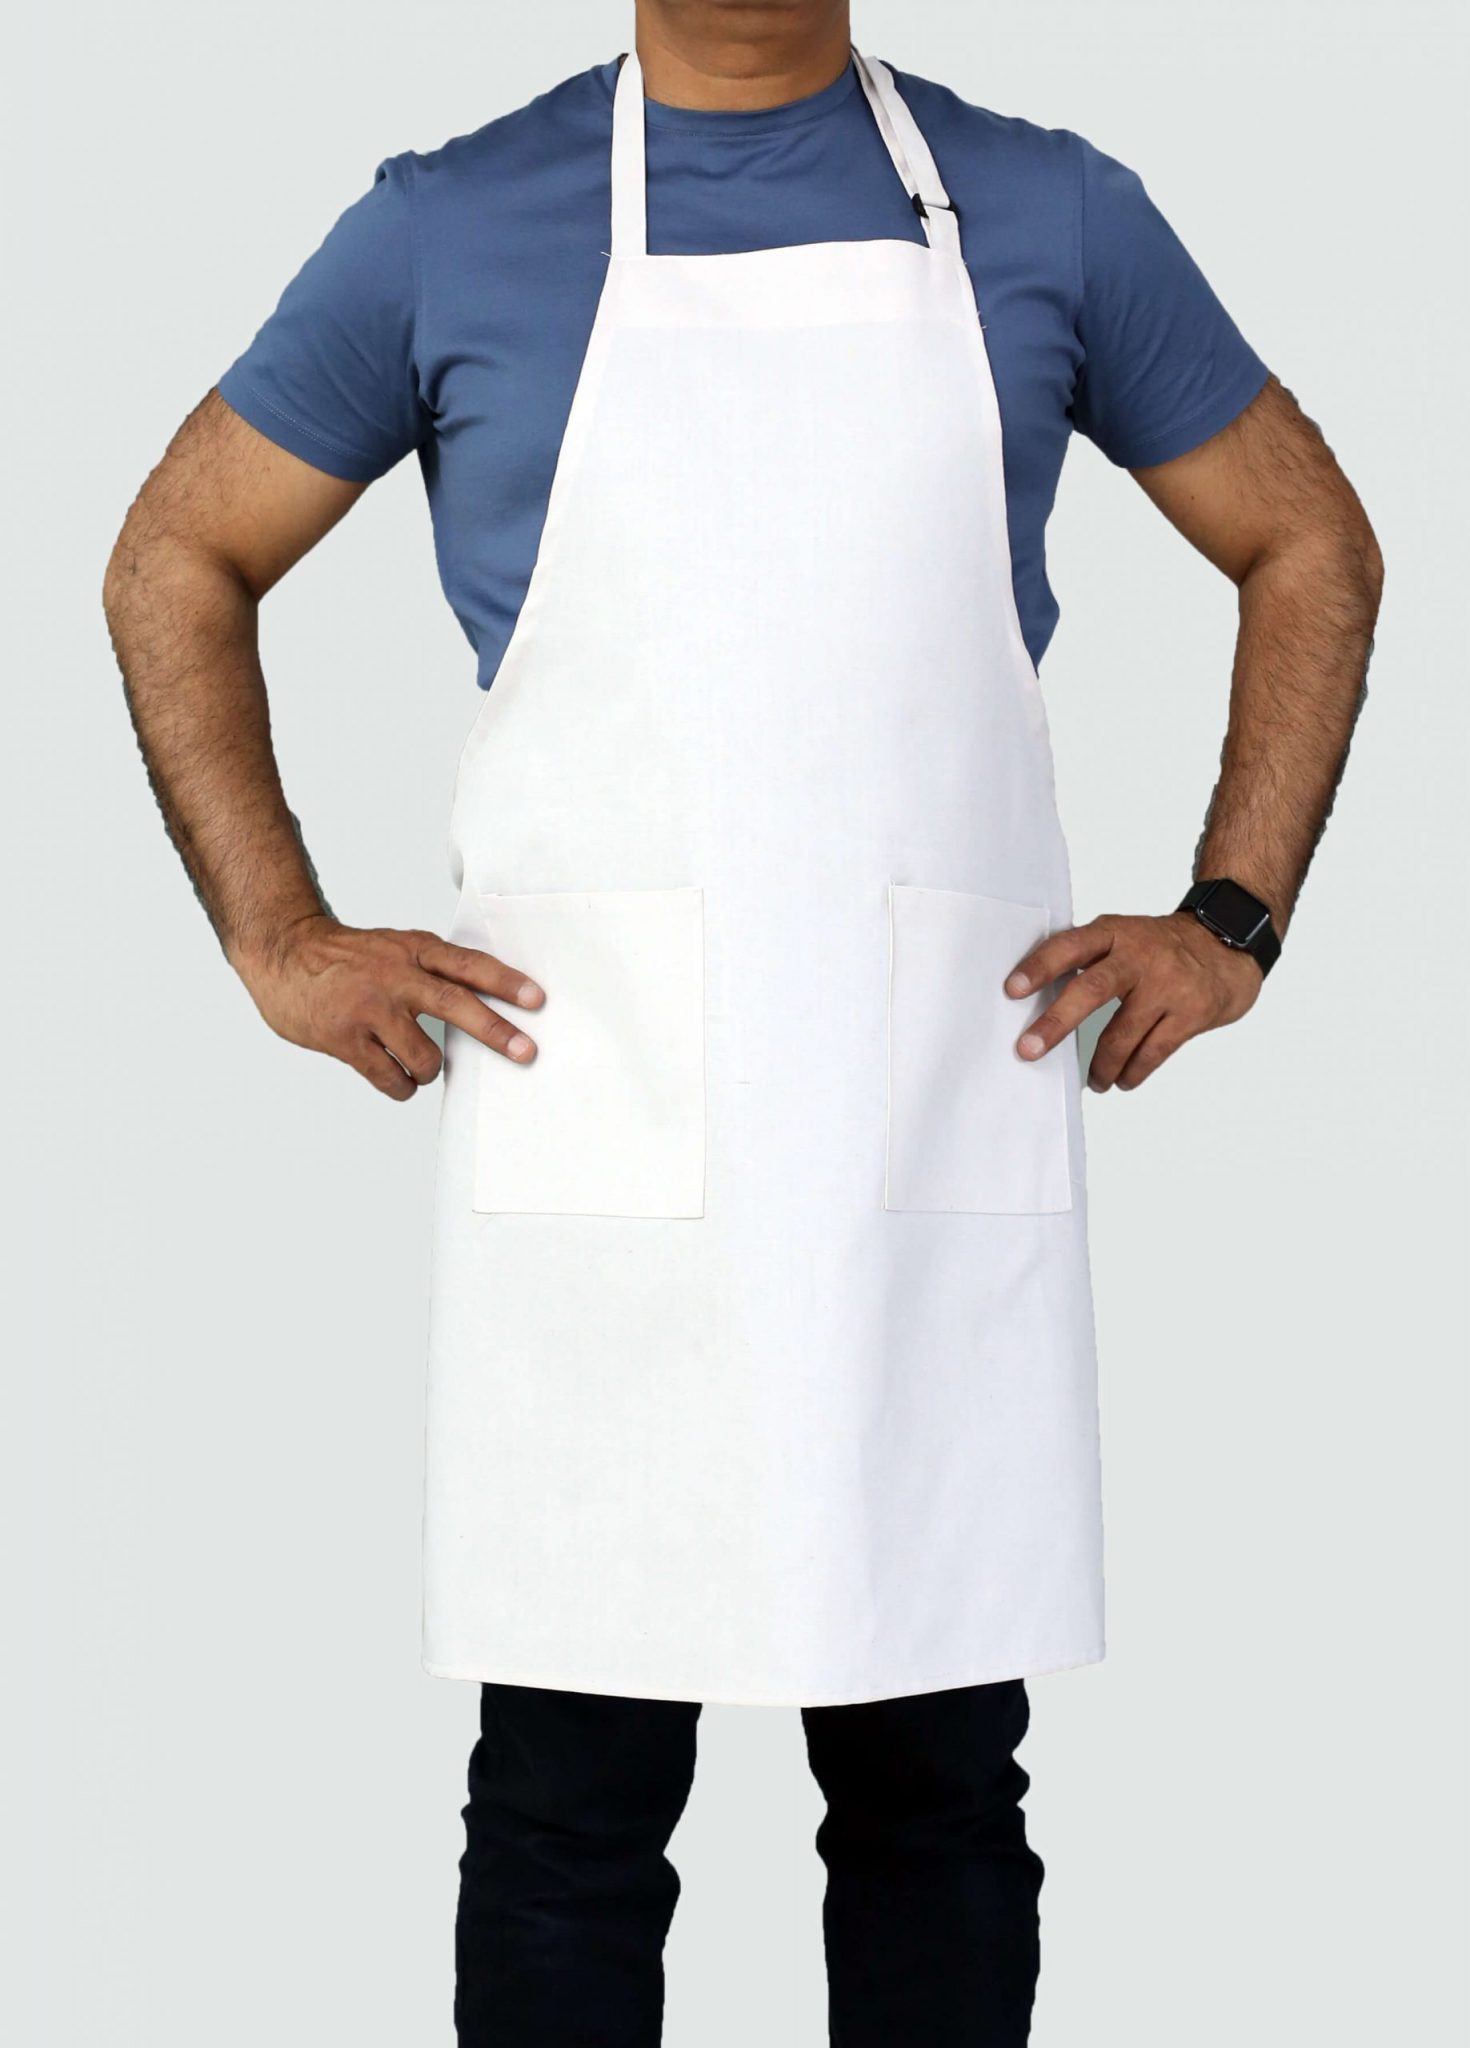 Black Bistro Apron with Pocket 34 X 28 Chefs Choice by Resturant linen 